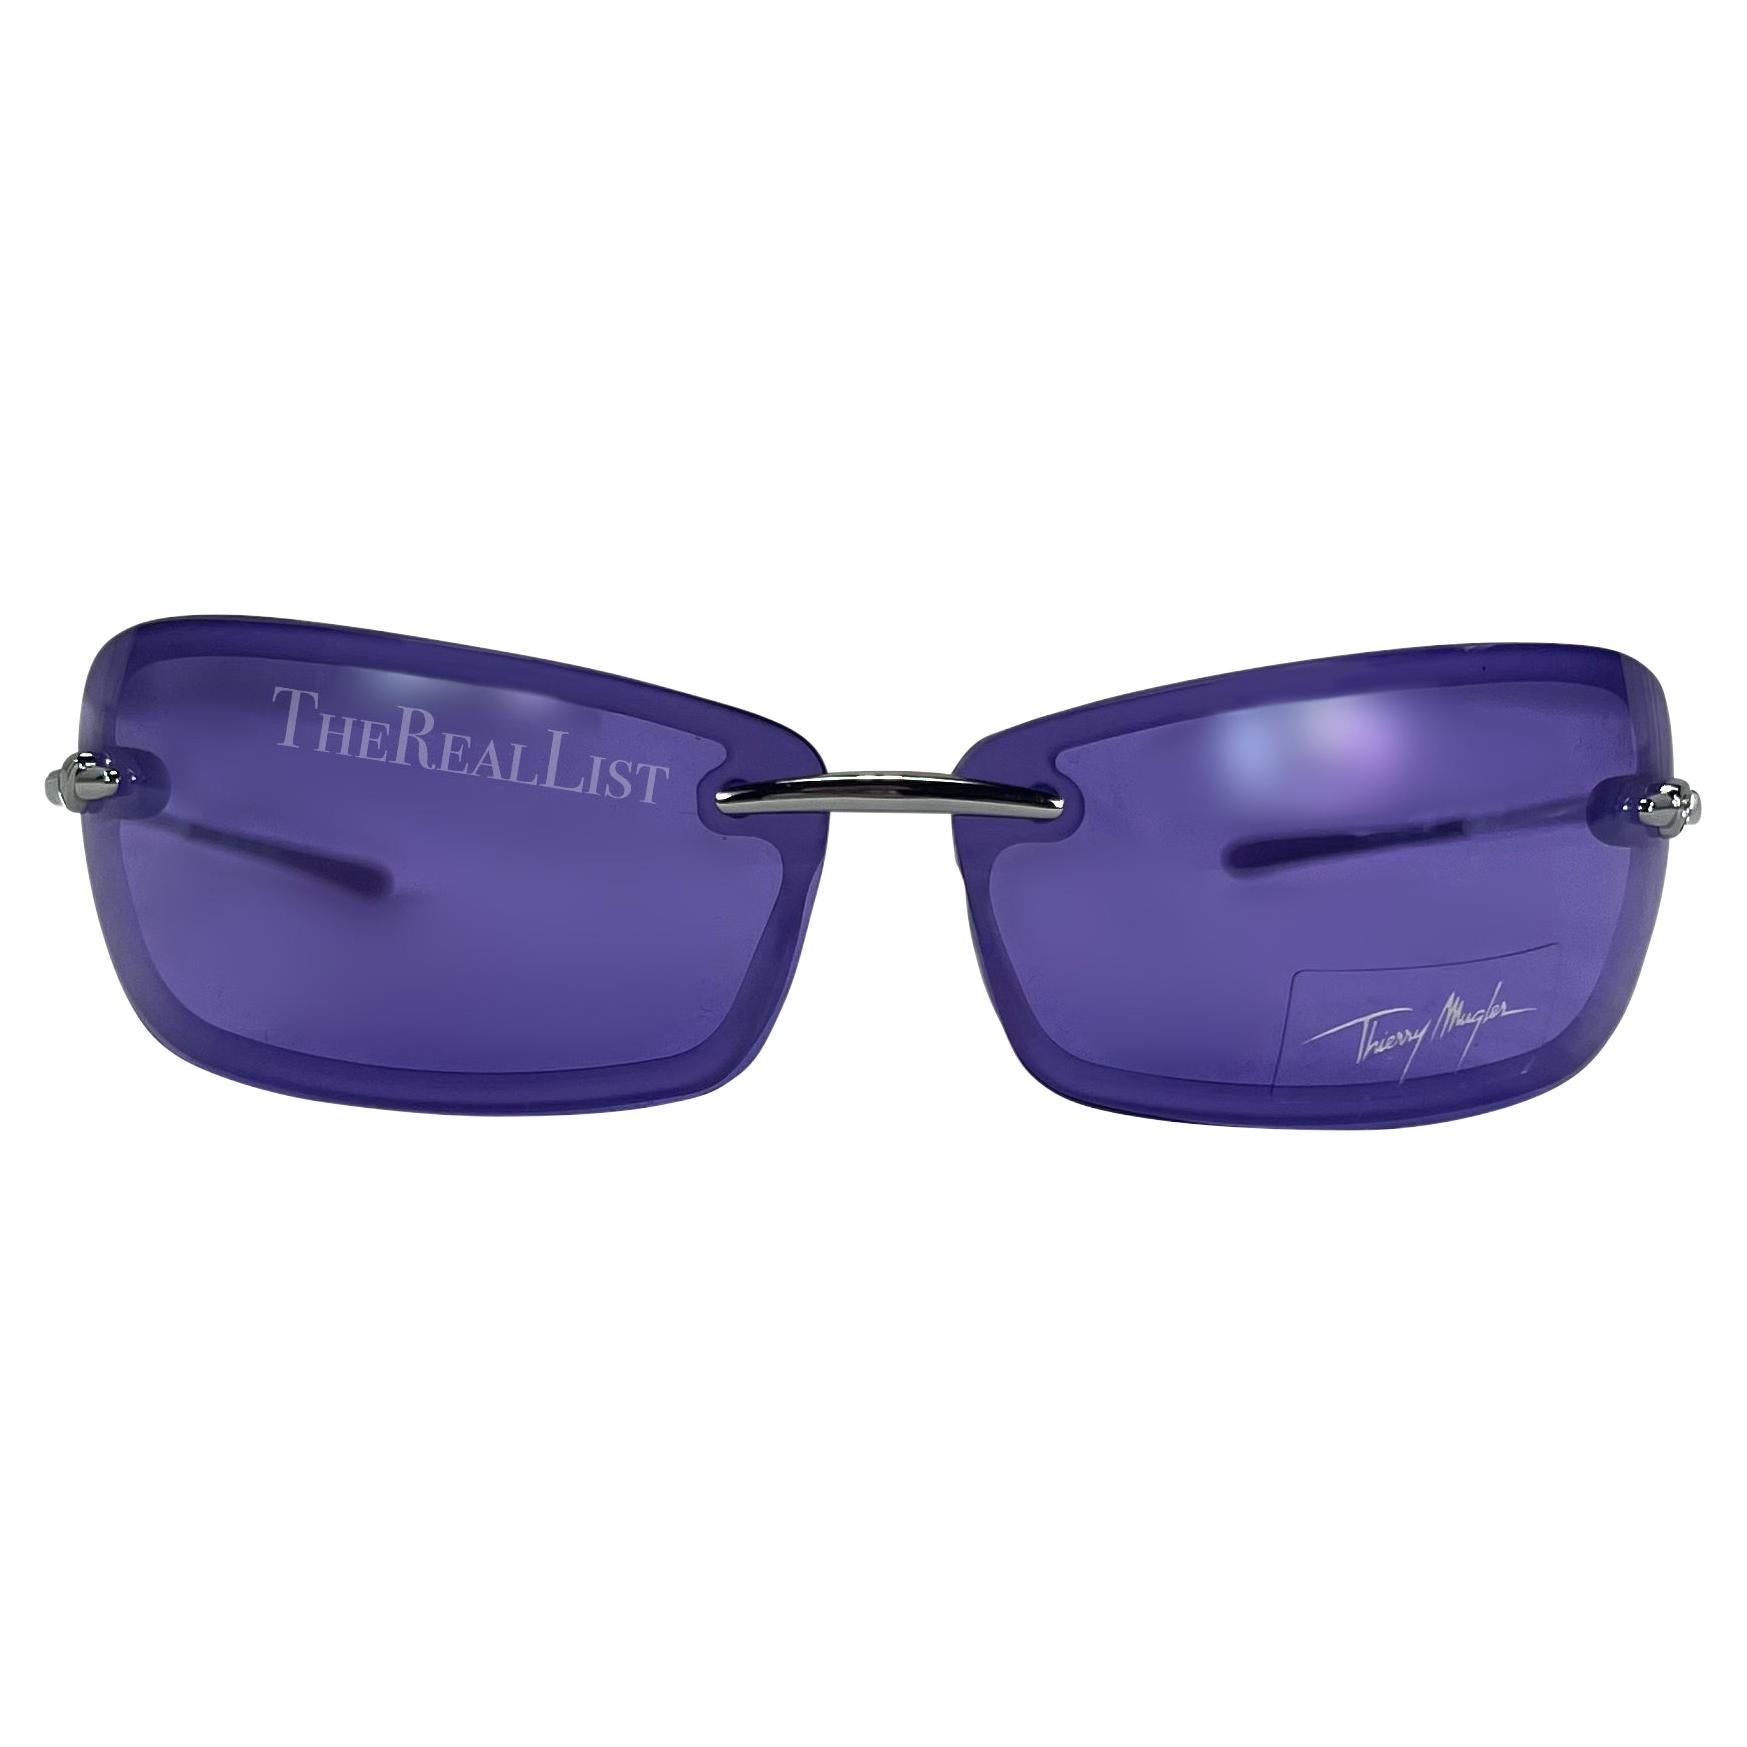 NWT Early 2000s Thierry Mugler Purple Rimless Rectangular Sunglasses For Sale